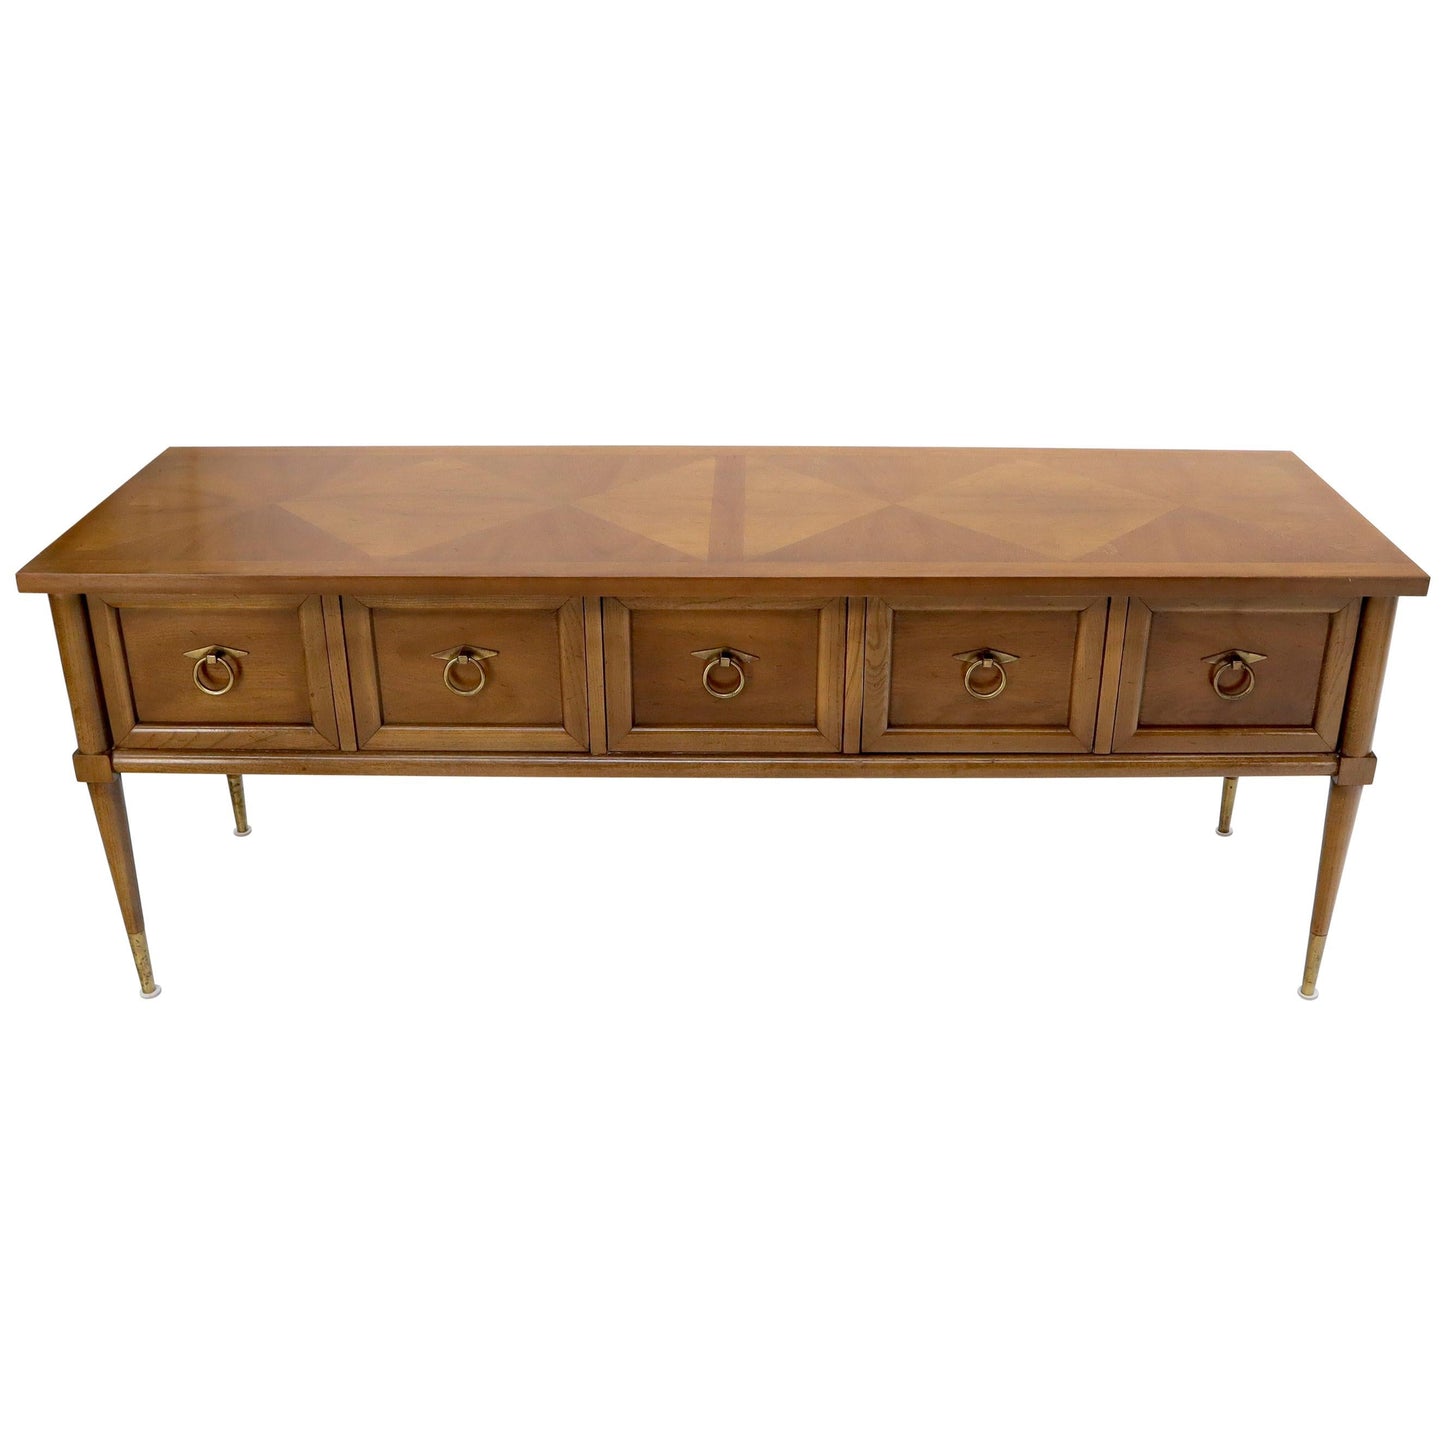 Mid-Century Modern Long Low Profile Credenza with Round Ring Drop Pulls